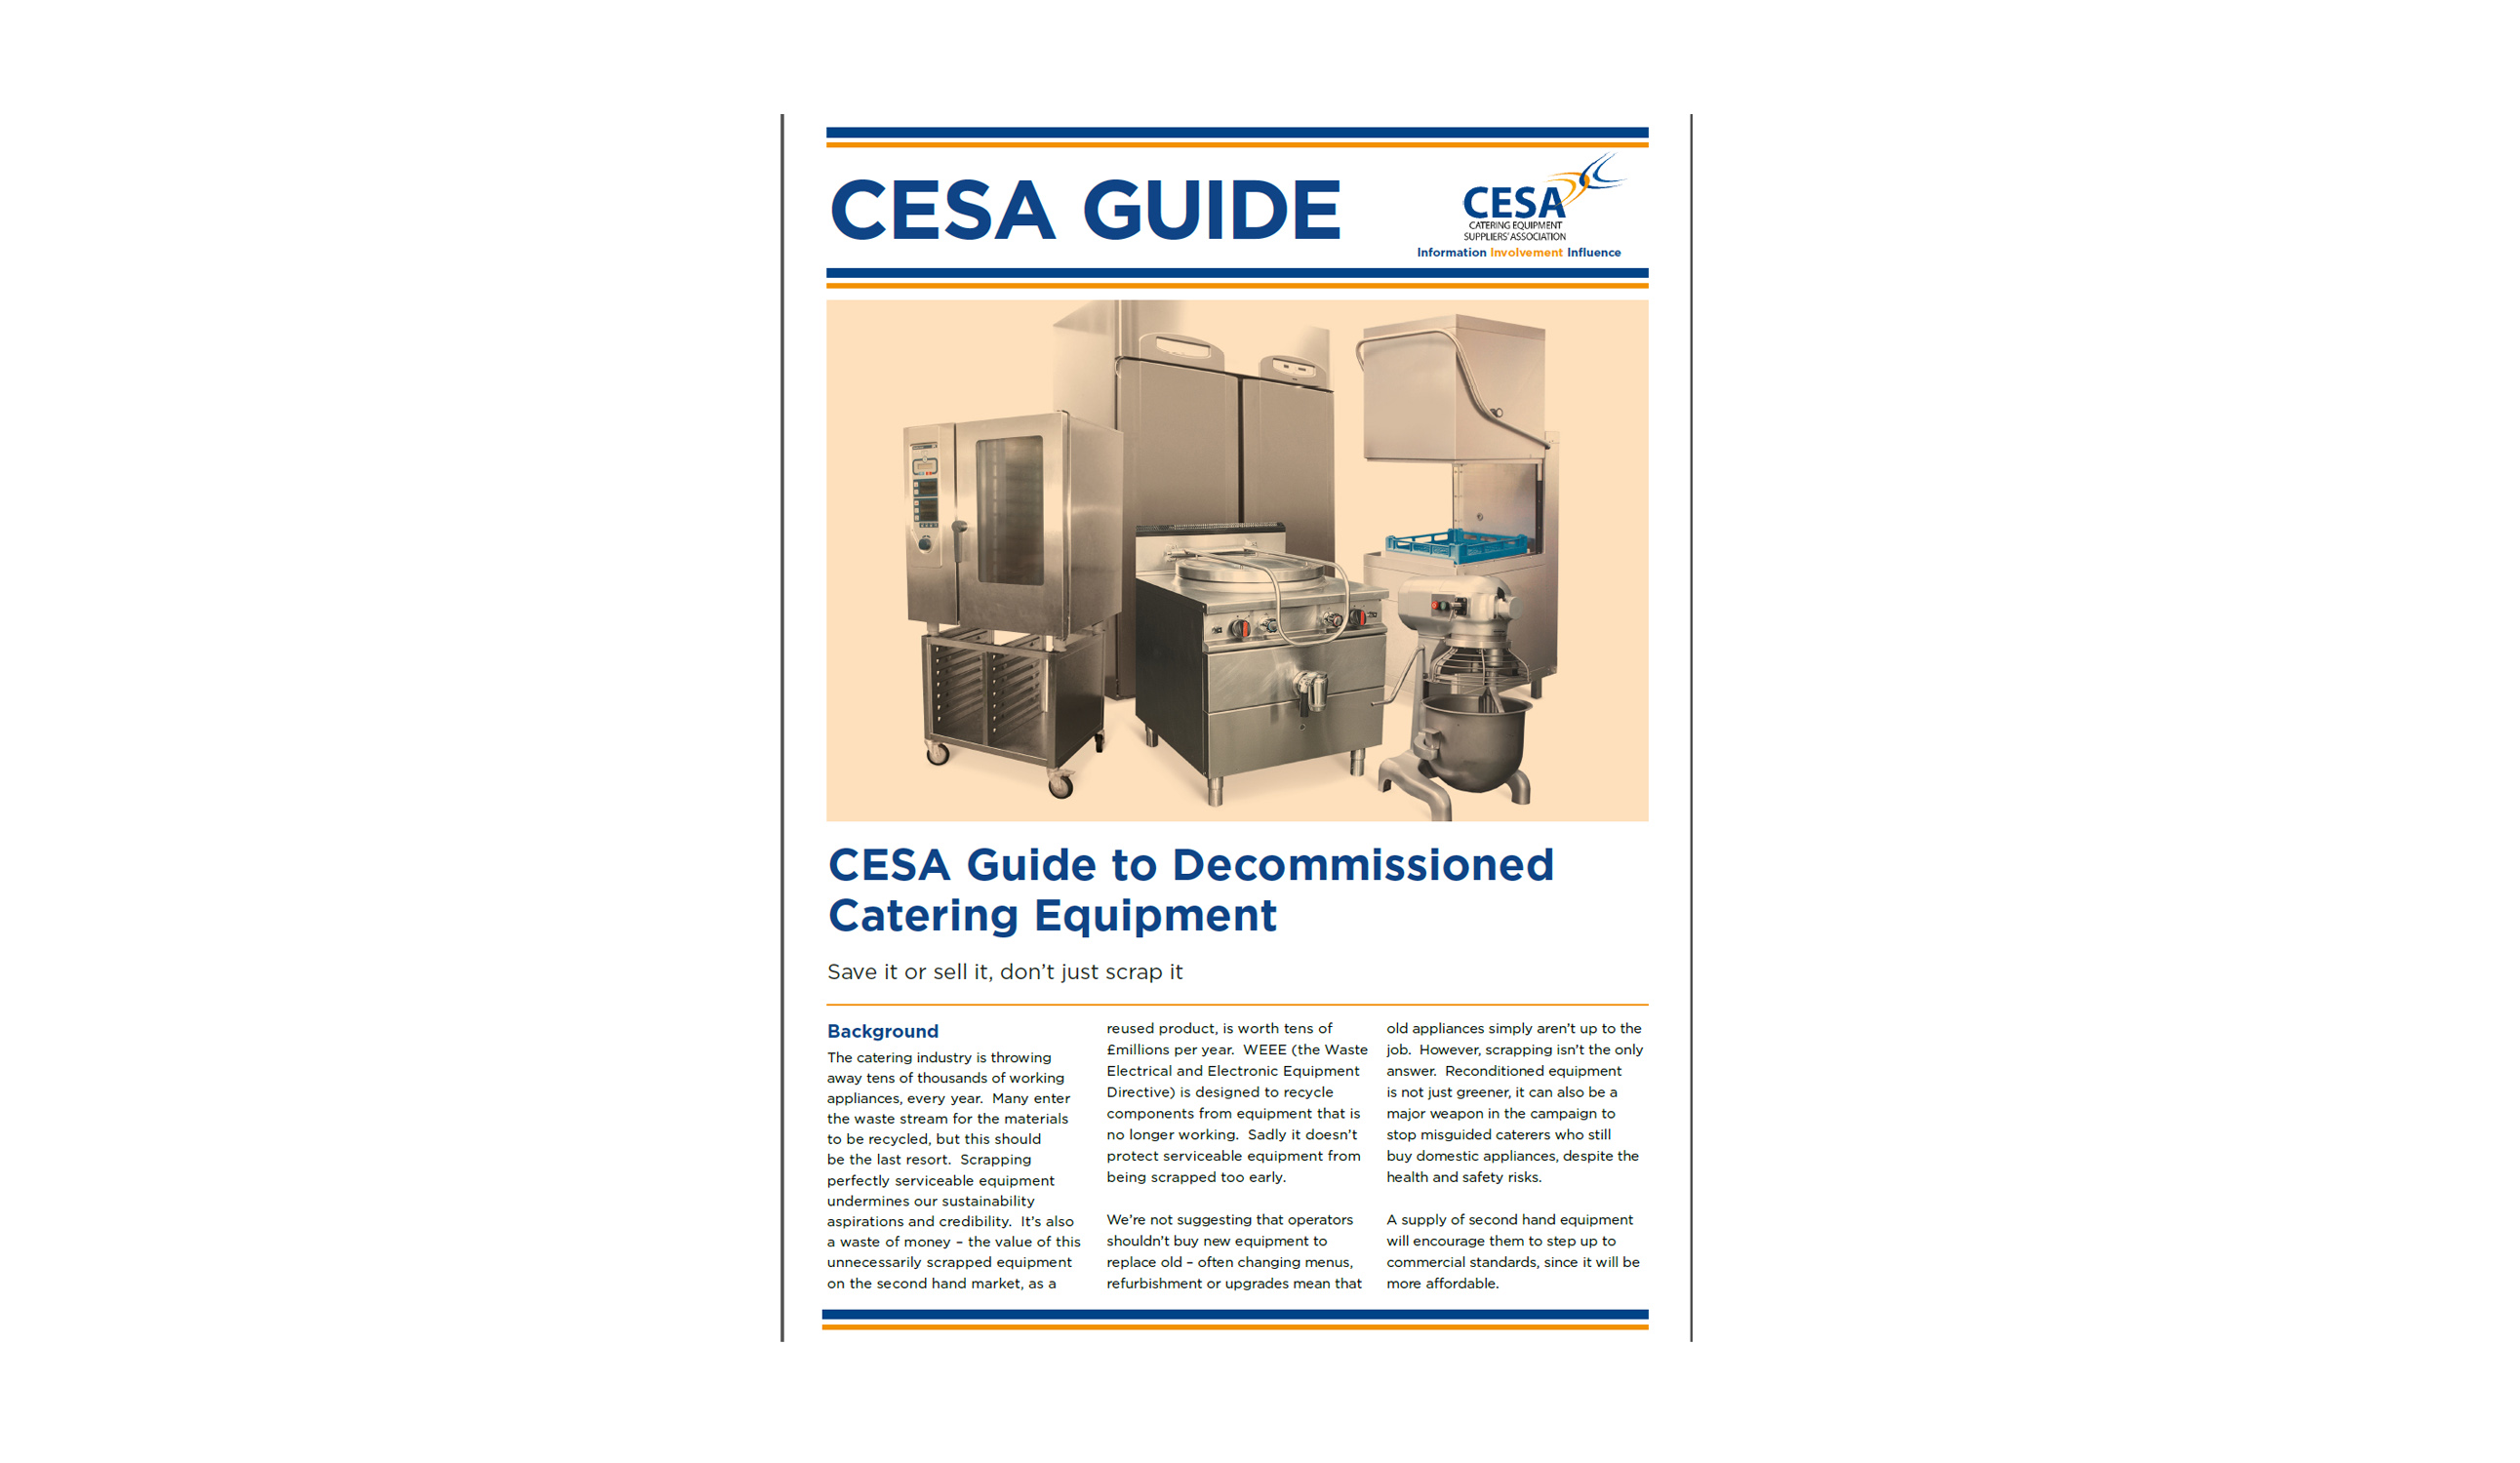 CESA launches Guide to Decommissioned Catering Equipment